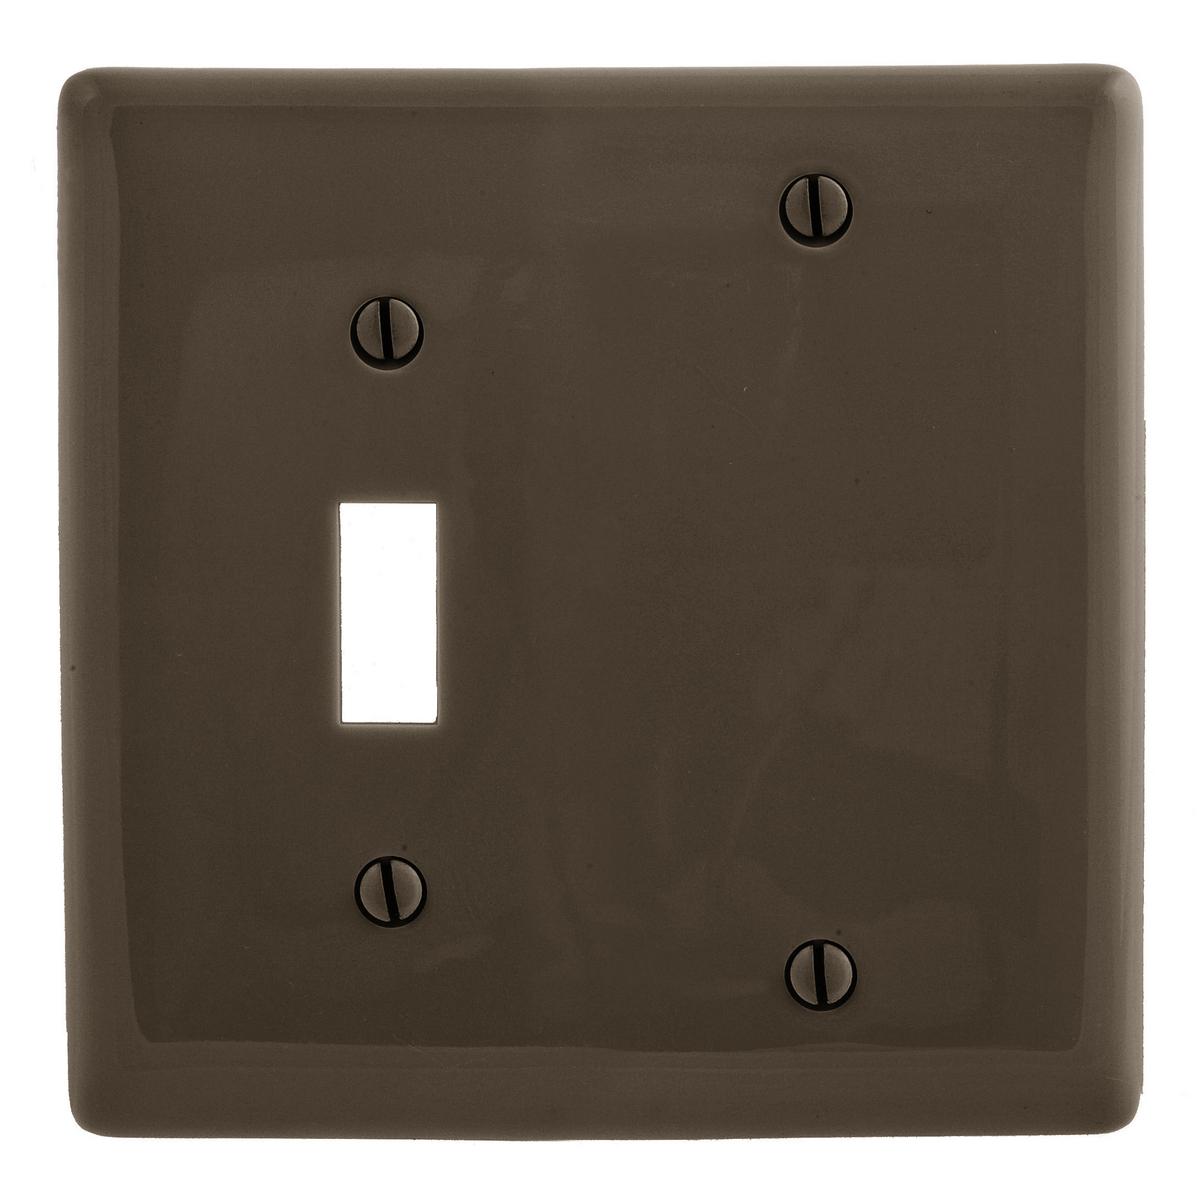 Hubbell NP113 Wallplates and Box Covers, Wallplate, Nylon, 2-Gang, 1) Toggle 1) Blank, Brown  ; Reinforcement ribs for extra strength ; High-impact, self-extinguishing nylon material ; Captive screw feature holds mounting screw in place ; Standard Size is 1/8" larger t